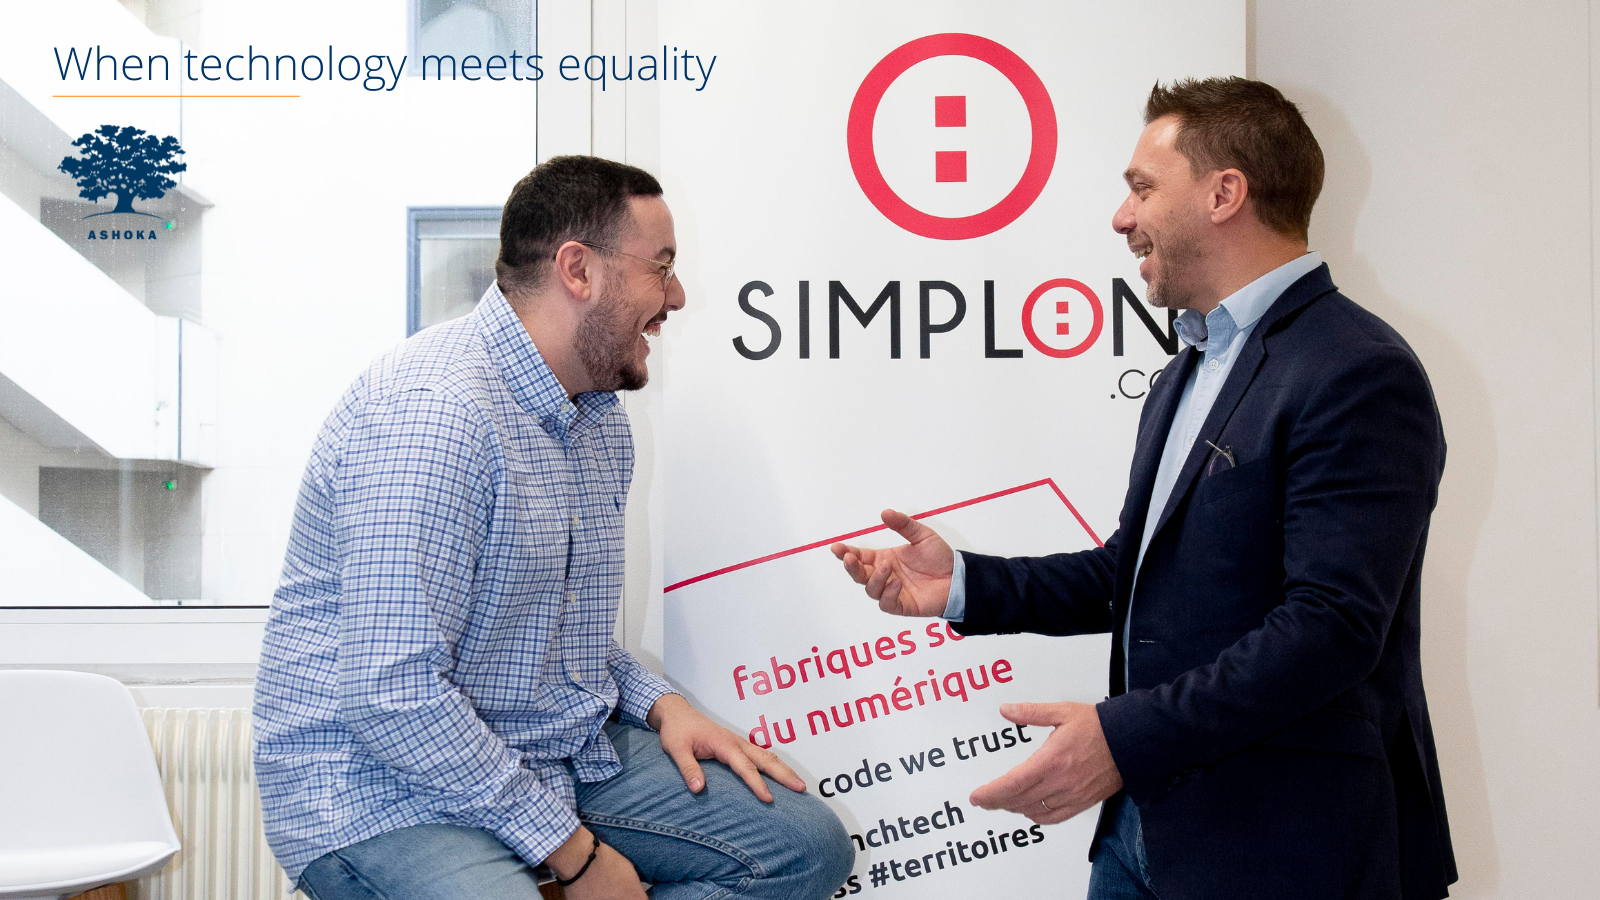 When technology meets equality_SIMPLON.co